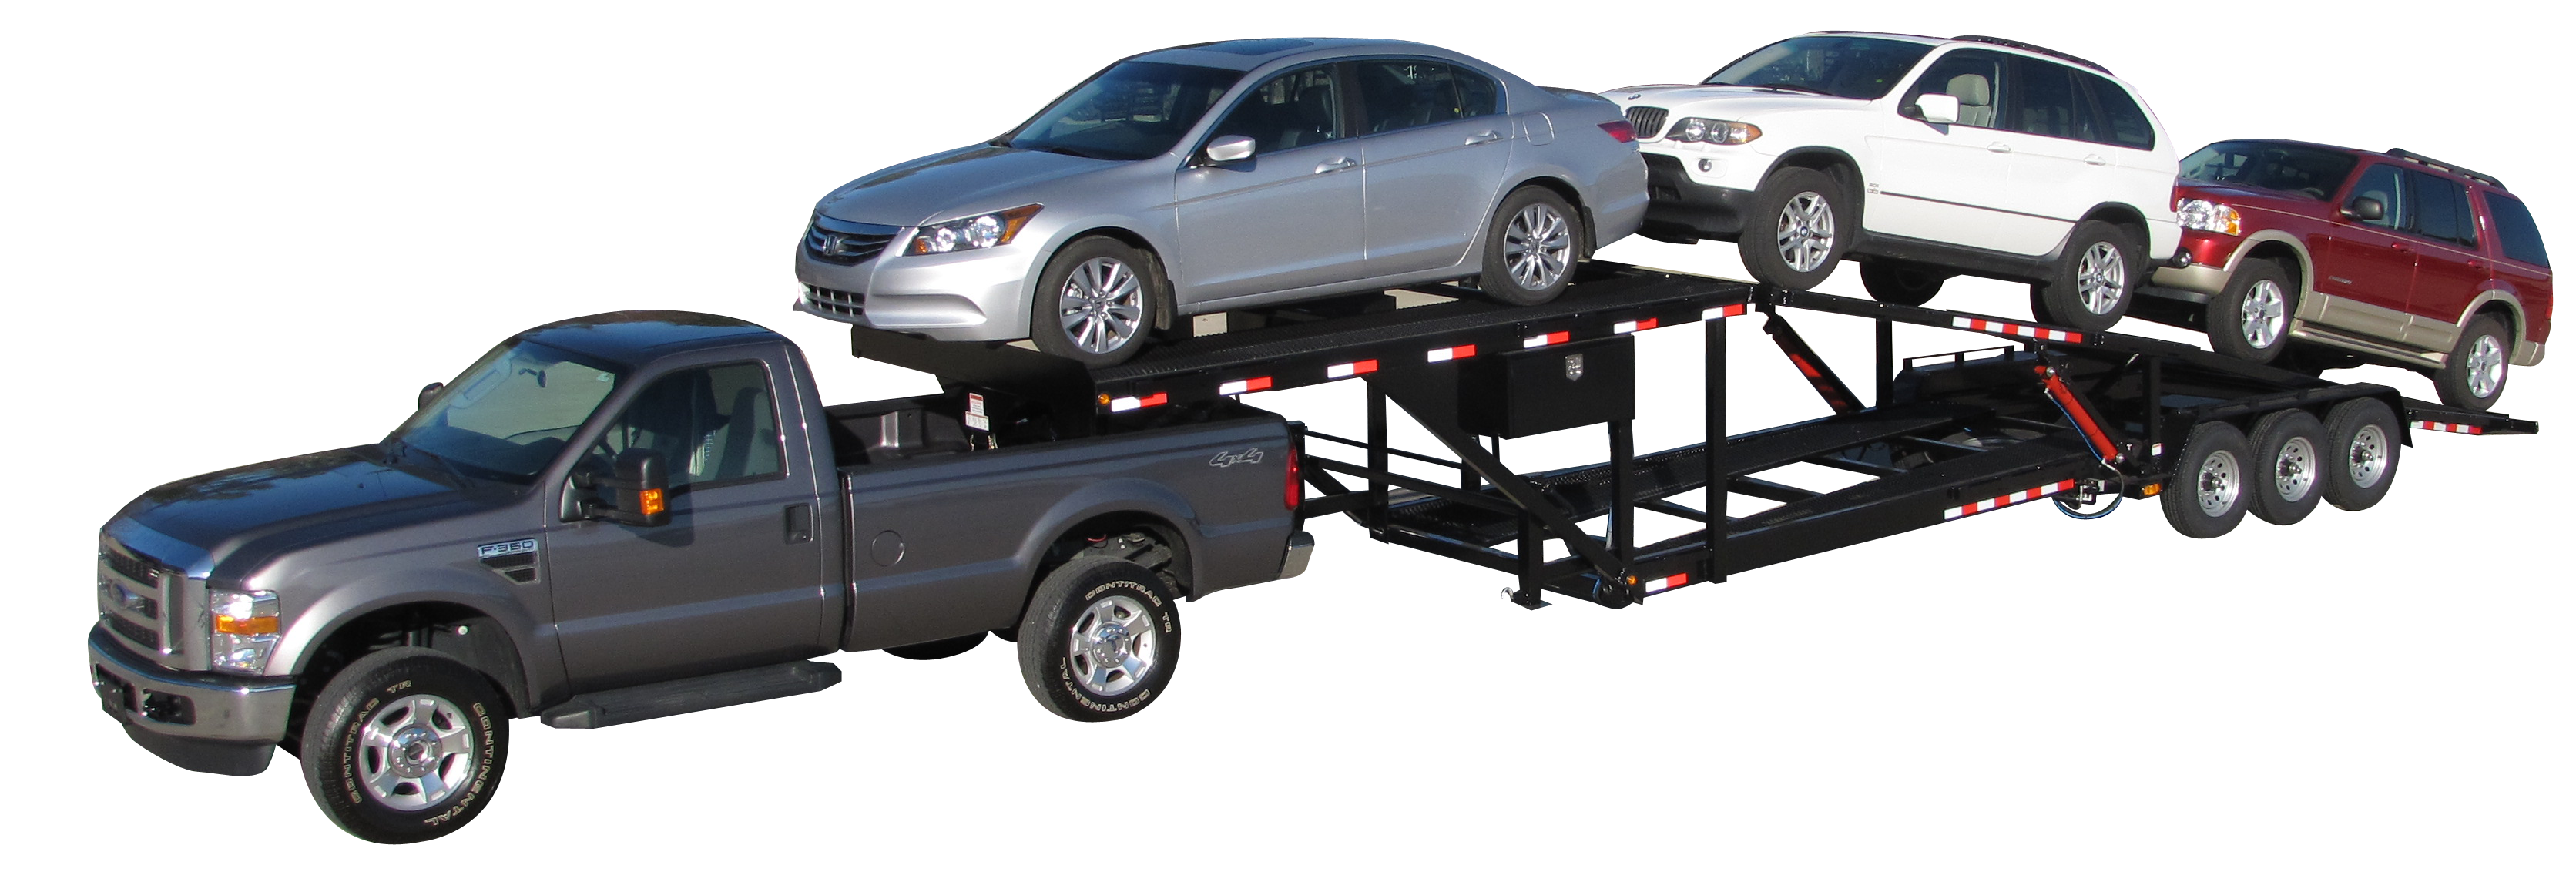 Four Car Trailer for Sale by Appalachian Trailers! Call Today!